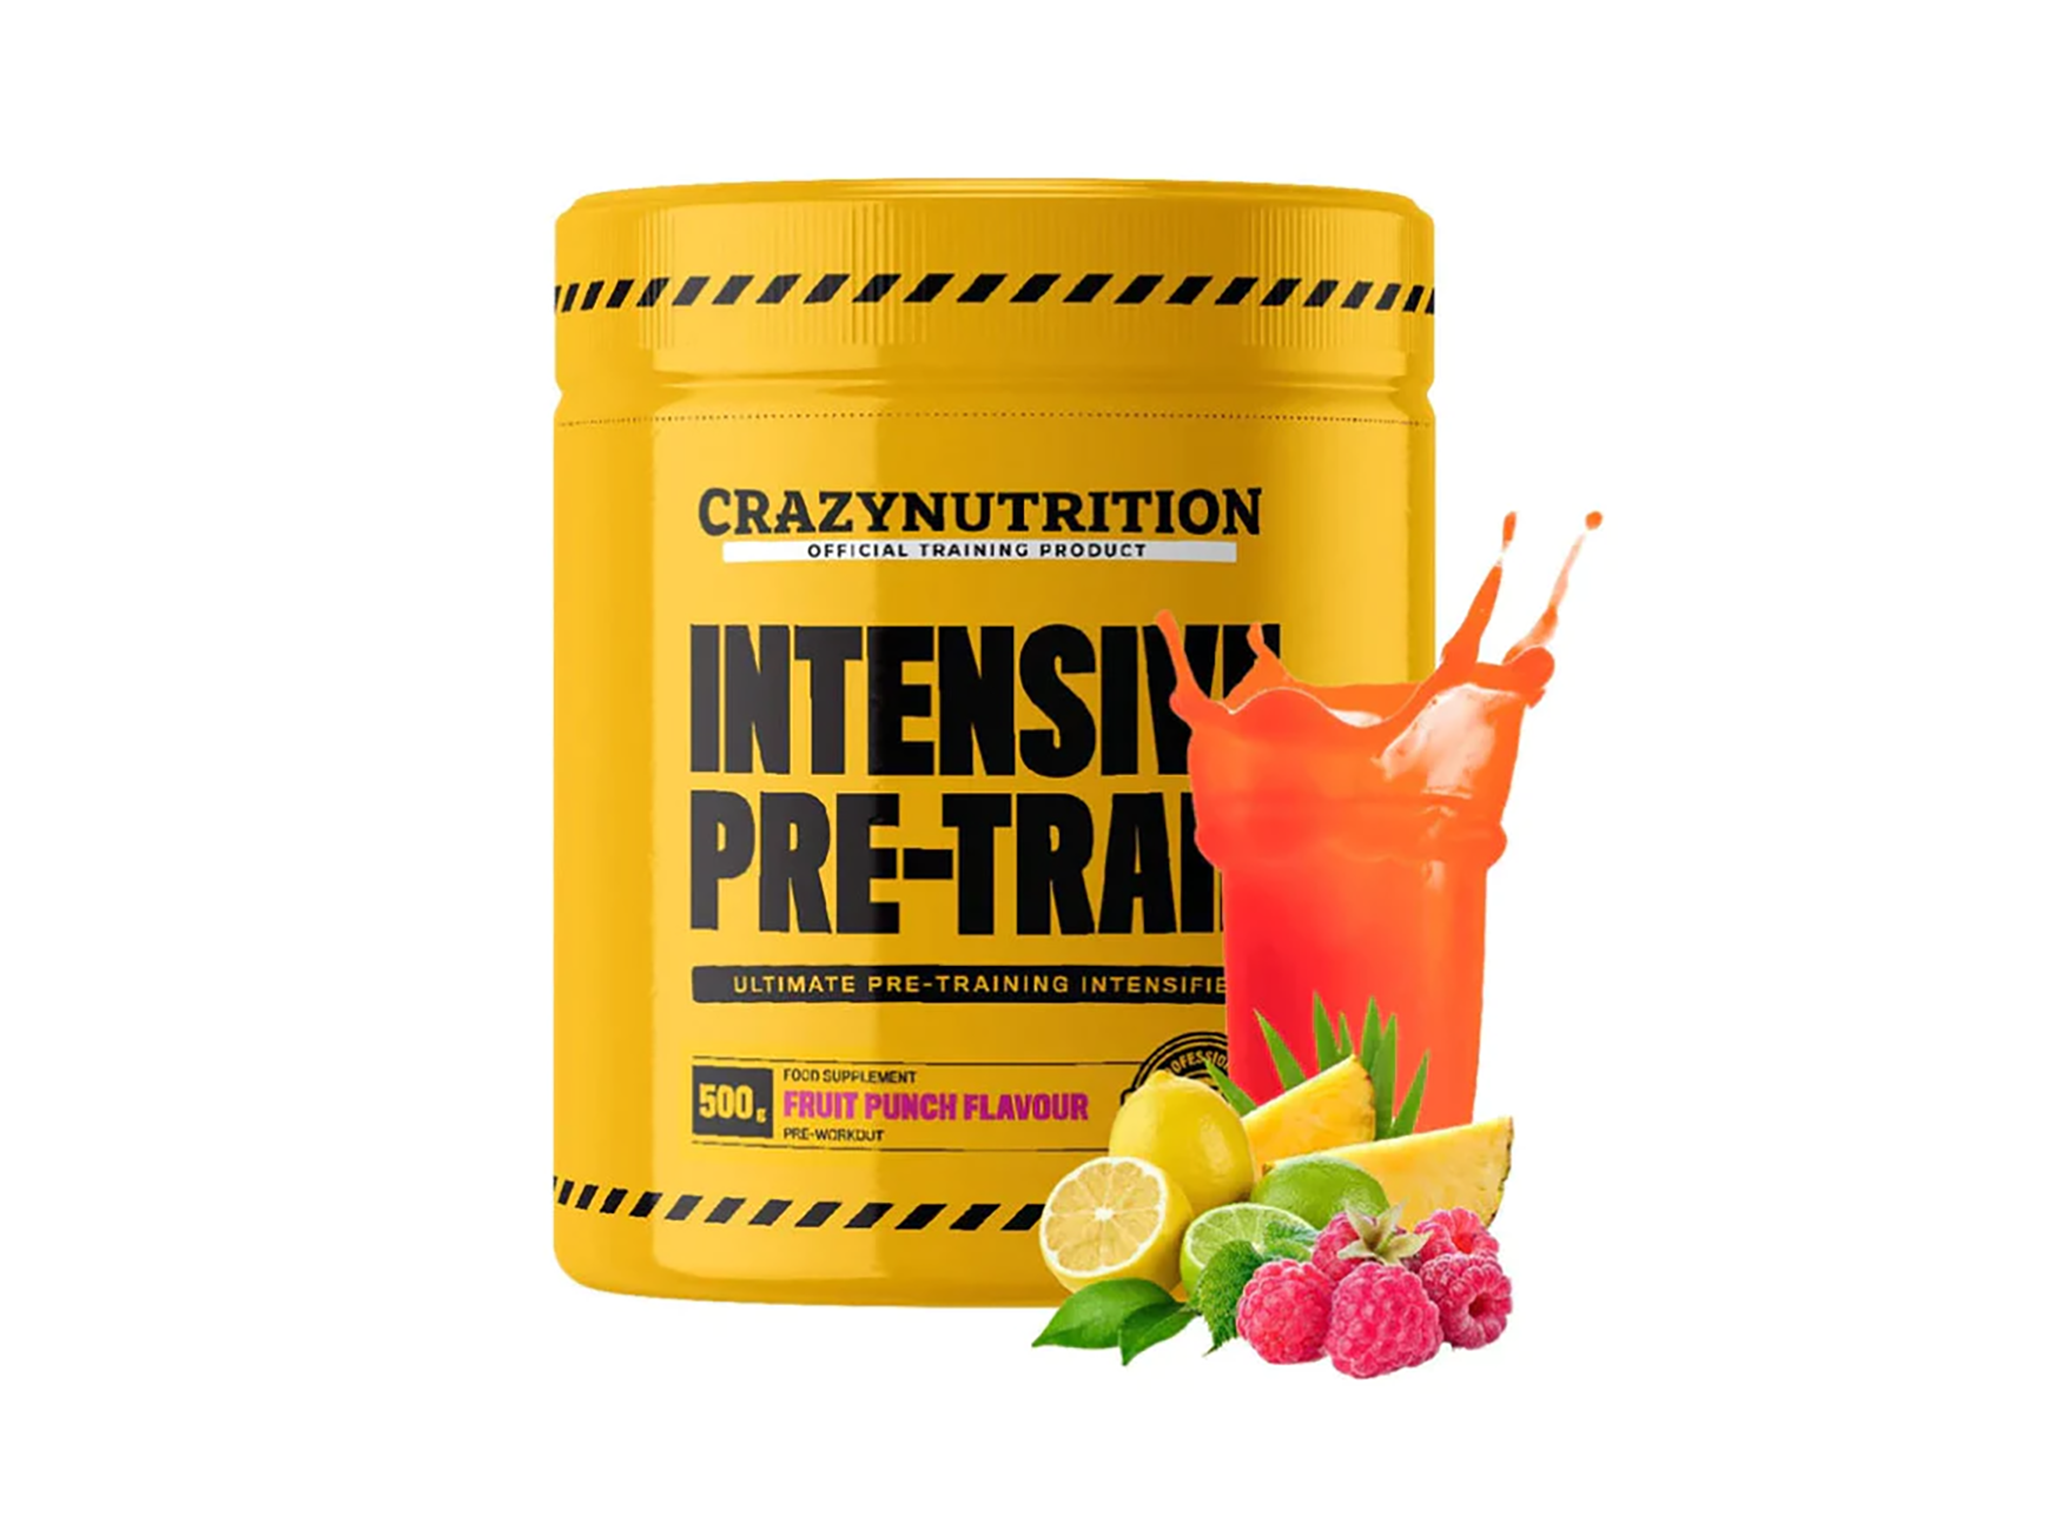 https://static.independent.co.uk/2023/02/17/16/Crazy%20Nutrition%20intensive%20pre-train%2C%20500g.png